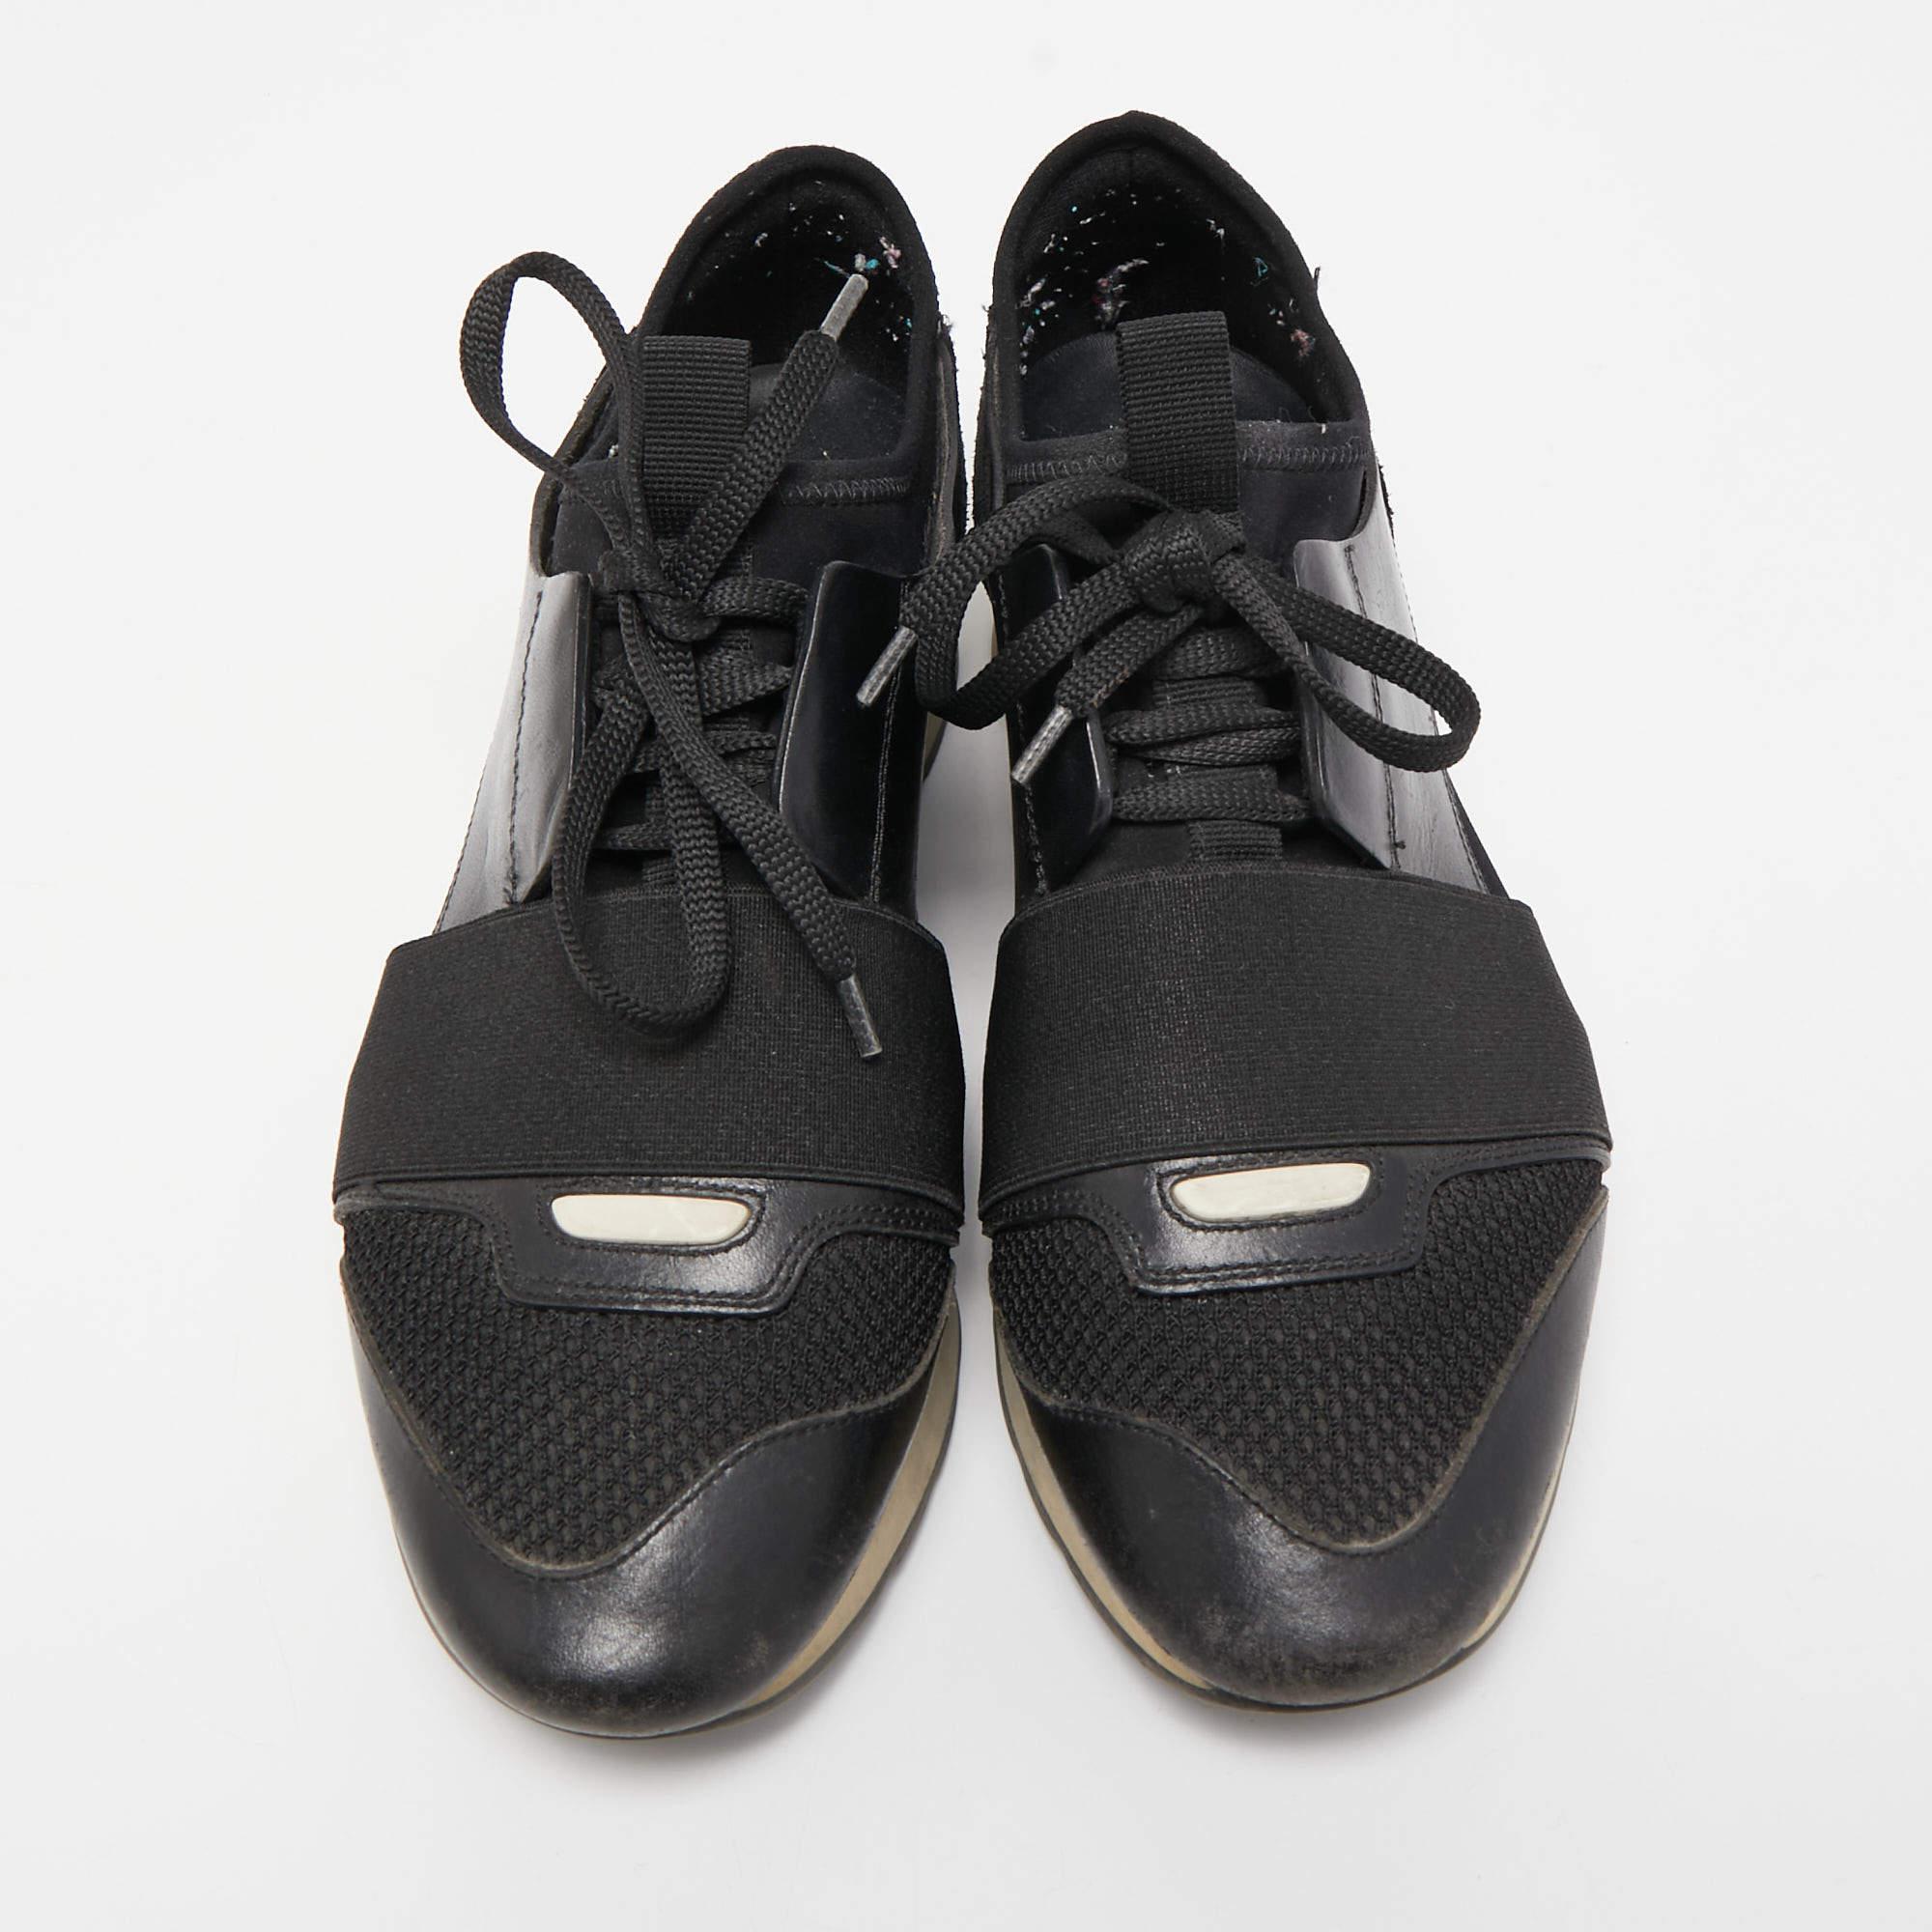 Let your latest addition be this pair of Race Runners sneakers from Balenciaga. Its exterior is crafted using black leather as well as mesh with covered toes, strap detailing on the vamps, and lace-up fastenings. This pair is completed with a